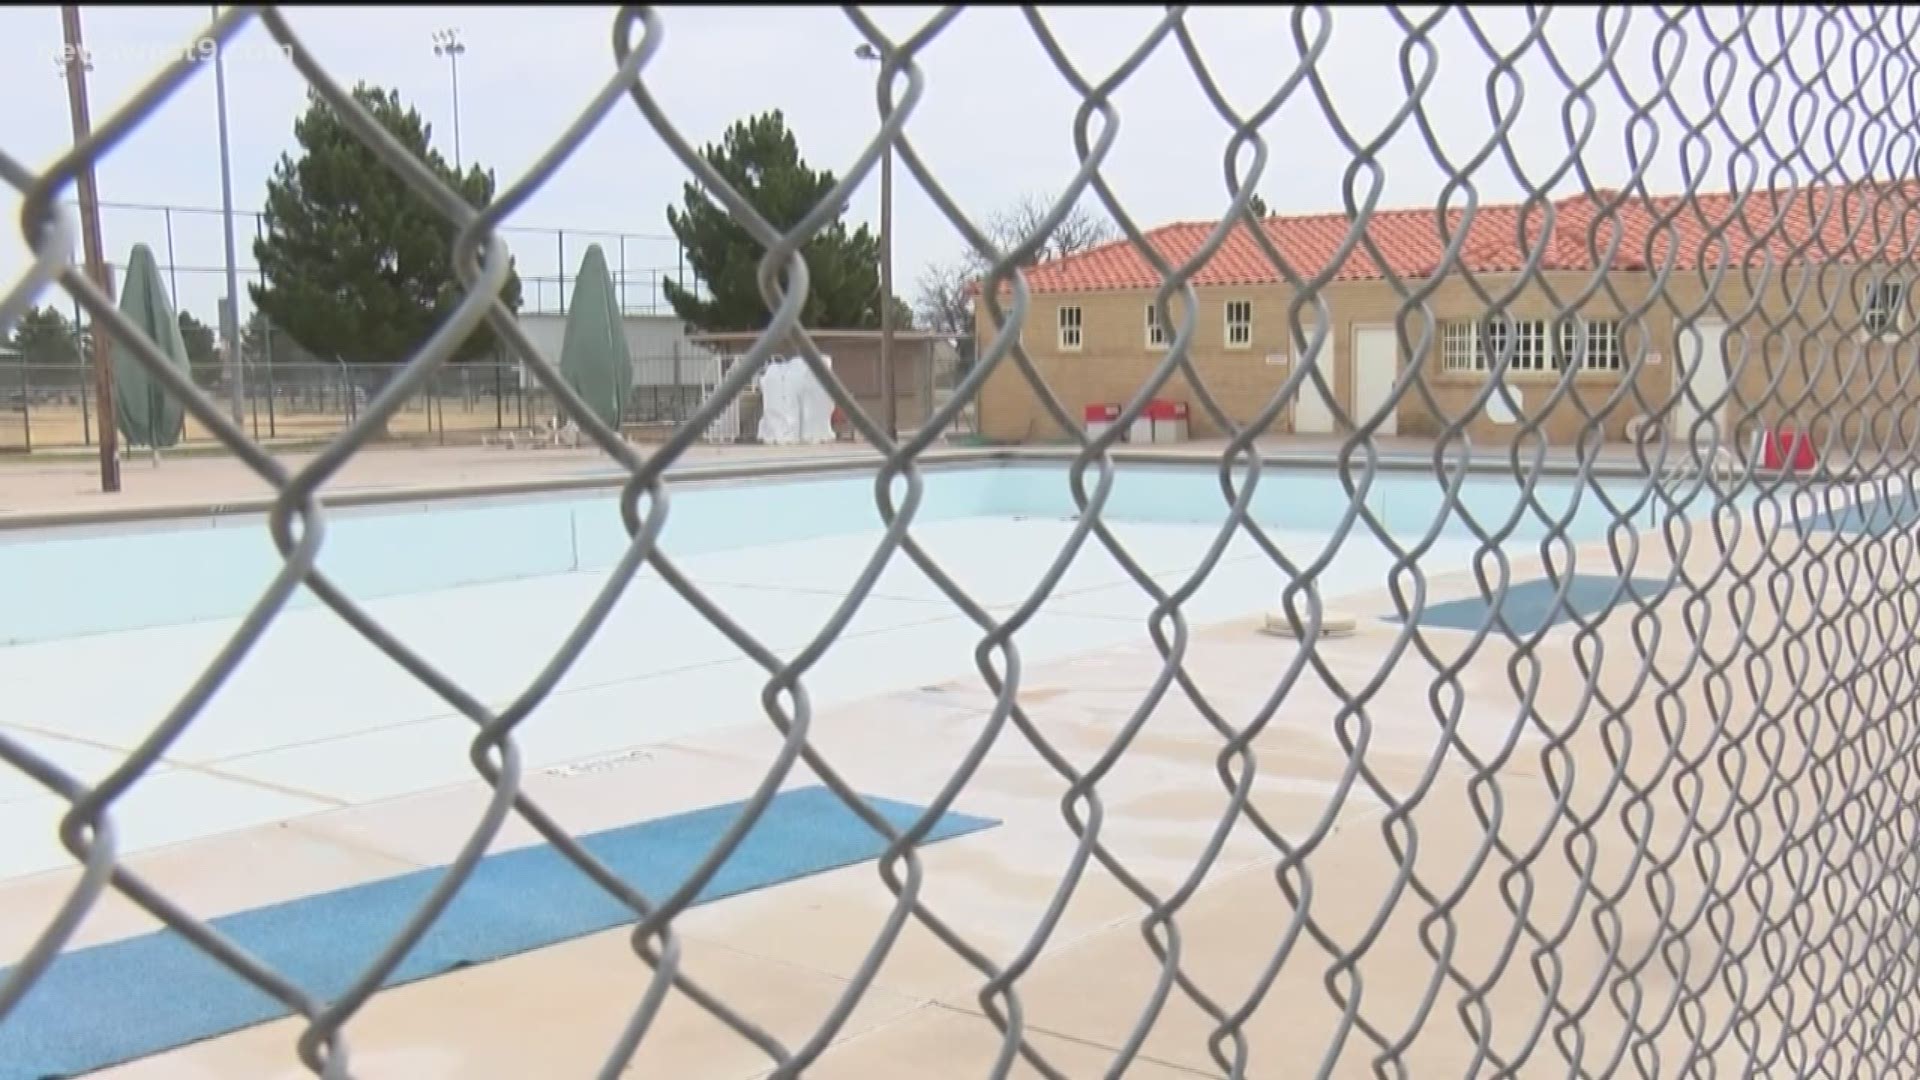 Today's announcement reverses the county's prior decision to close all pools for the summer.